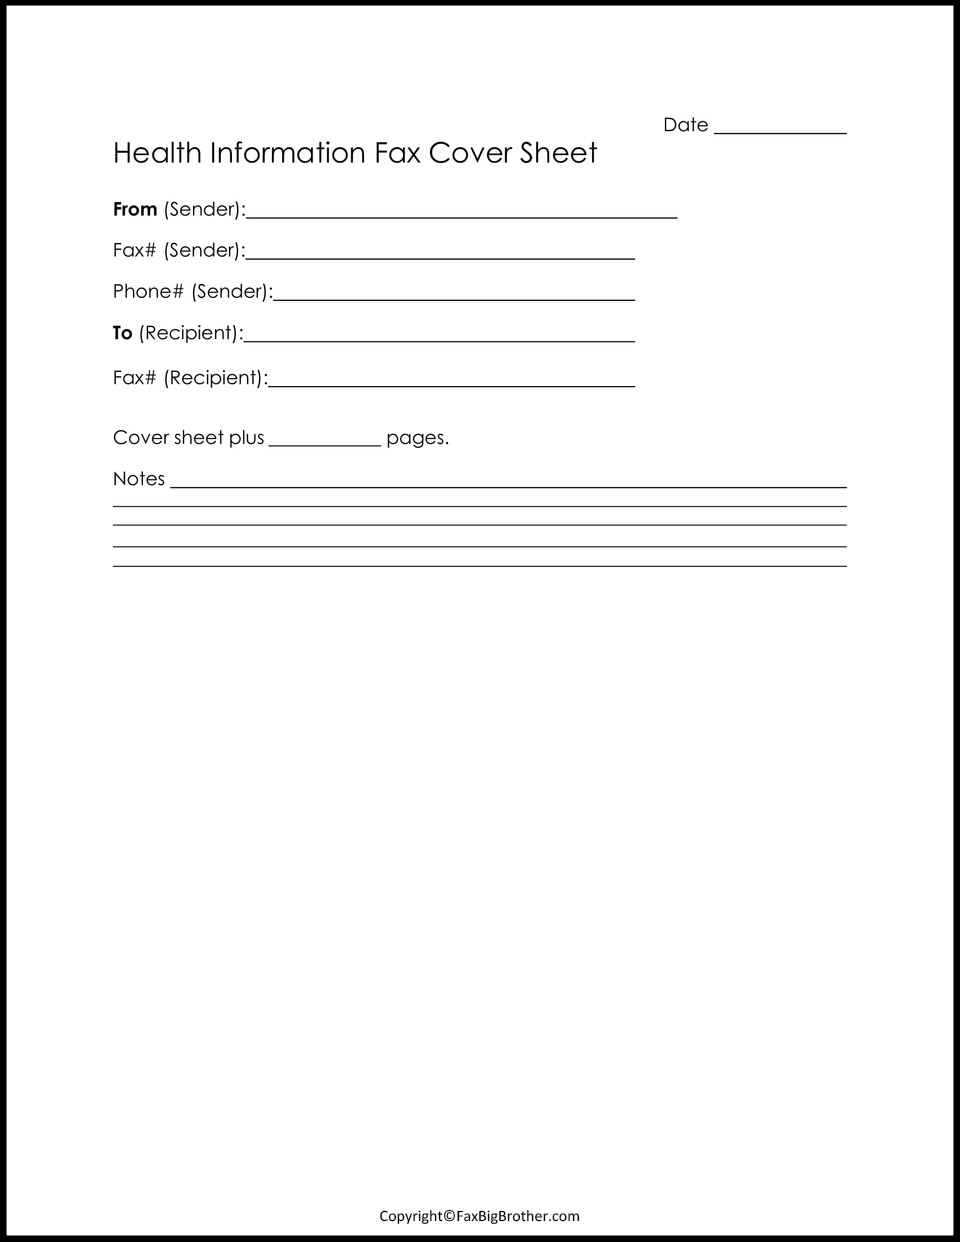 Medical Fax Cover Sheet